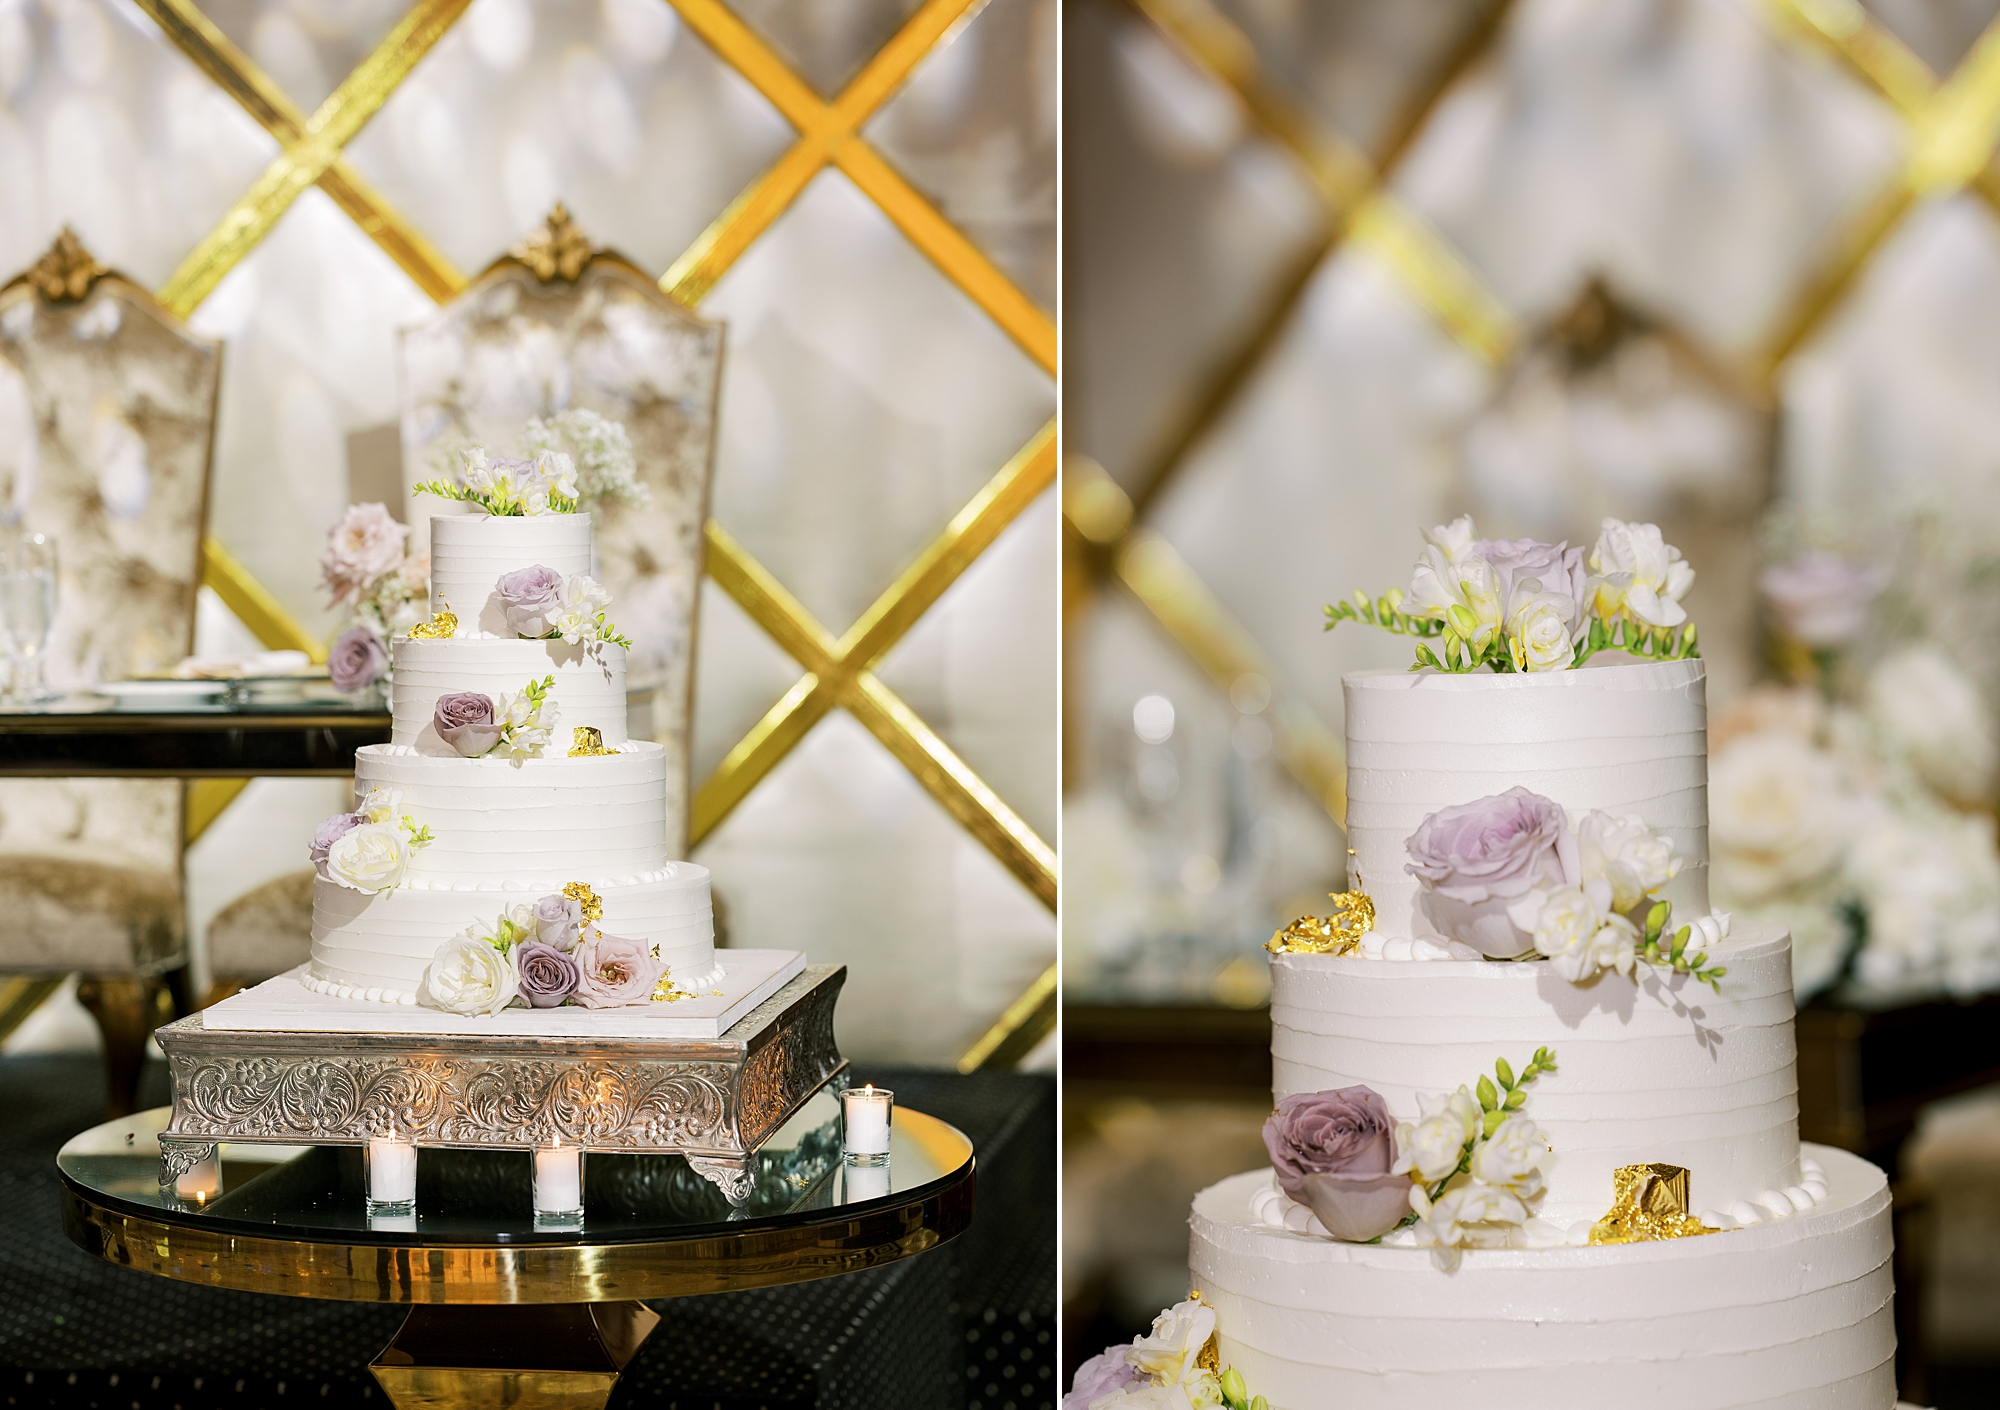 tiered wedding cake with purple and ivory flowers on display at Shadowbrook at Shrewsbury